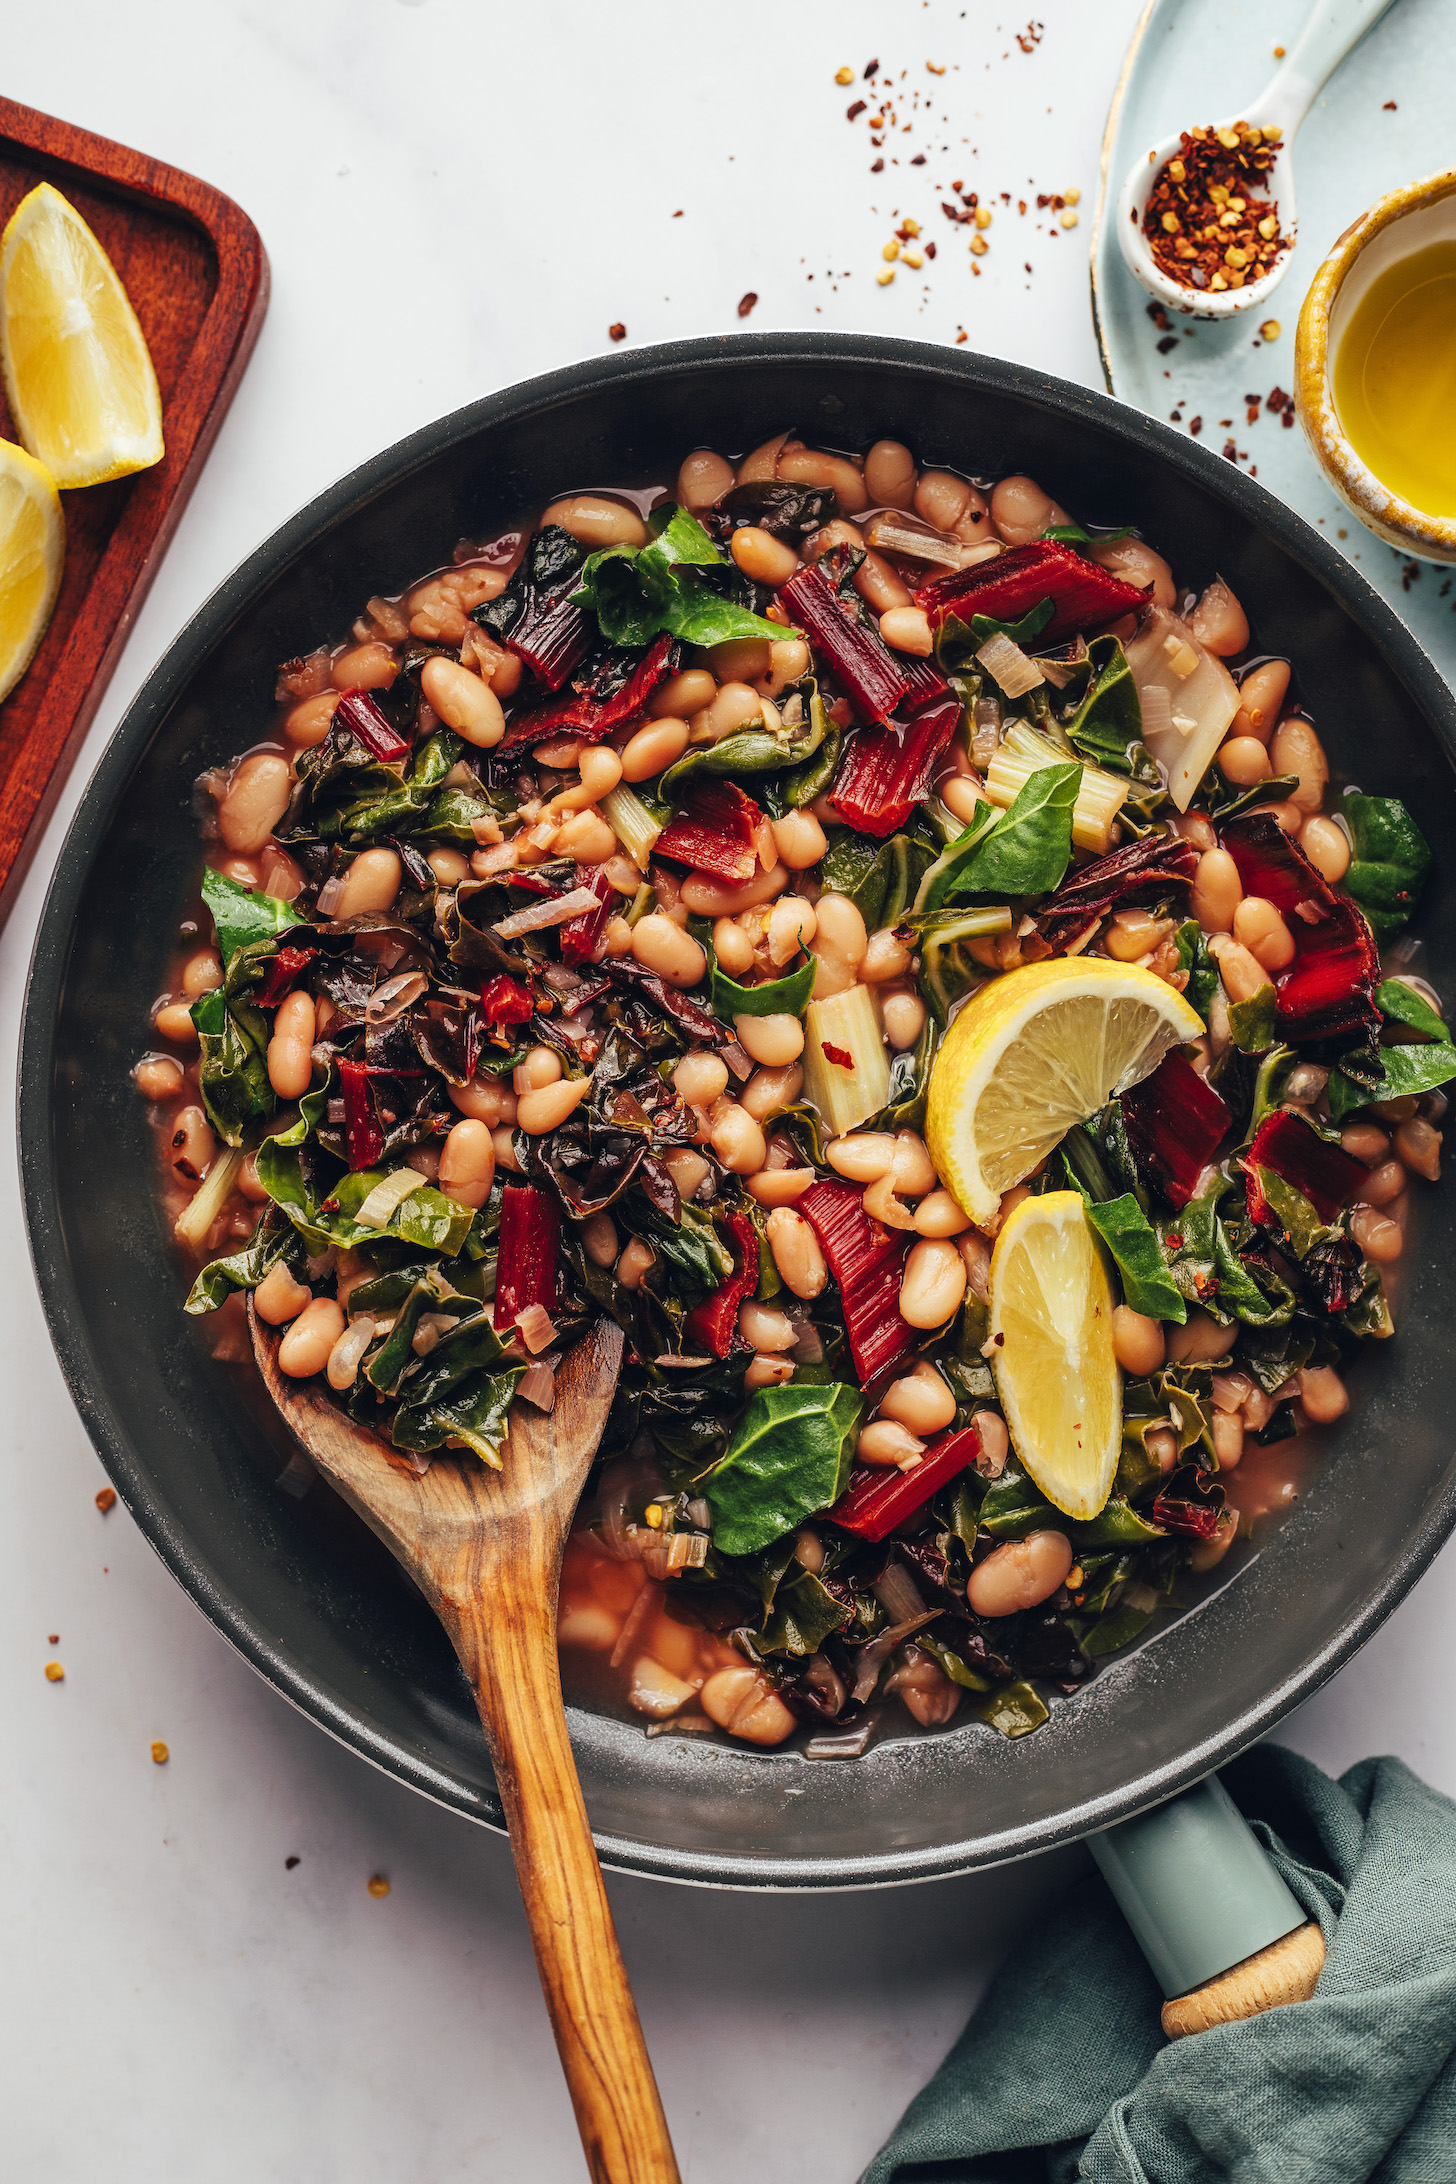 Lemons, olive oil, and red pepper flakes around a pan of beans and greens with lemon wedges